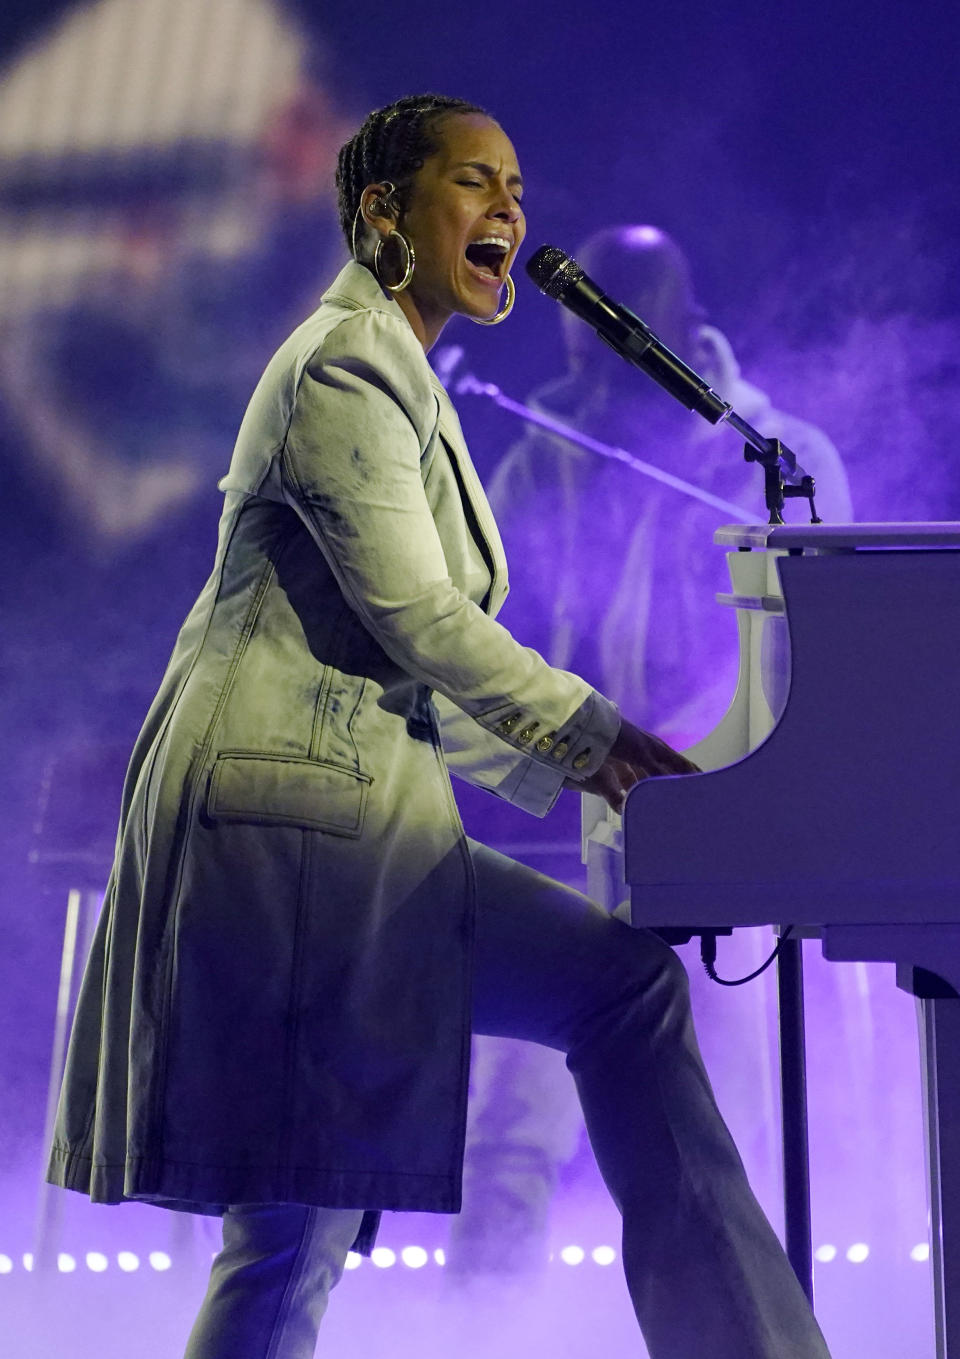 Alicia Keys performs at the Billboard Music Awards, Thursday, May 20, 2021, at the Microsoft Theater in Los Angeles. The awards show airs on May 23 with both live and prerecorded segments. (AP Photo/Chris Pizzello)